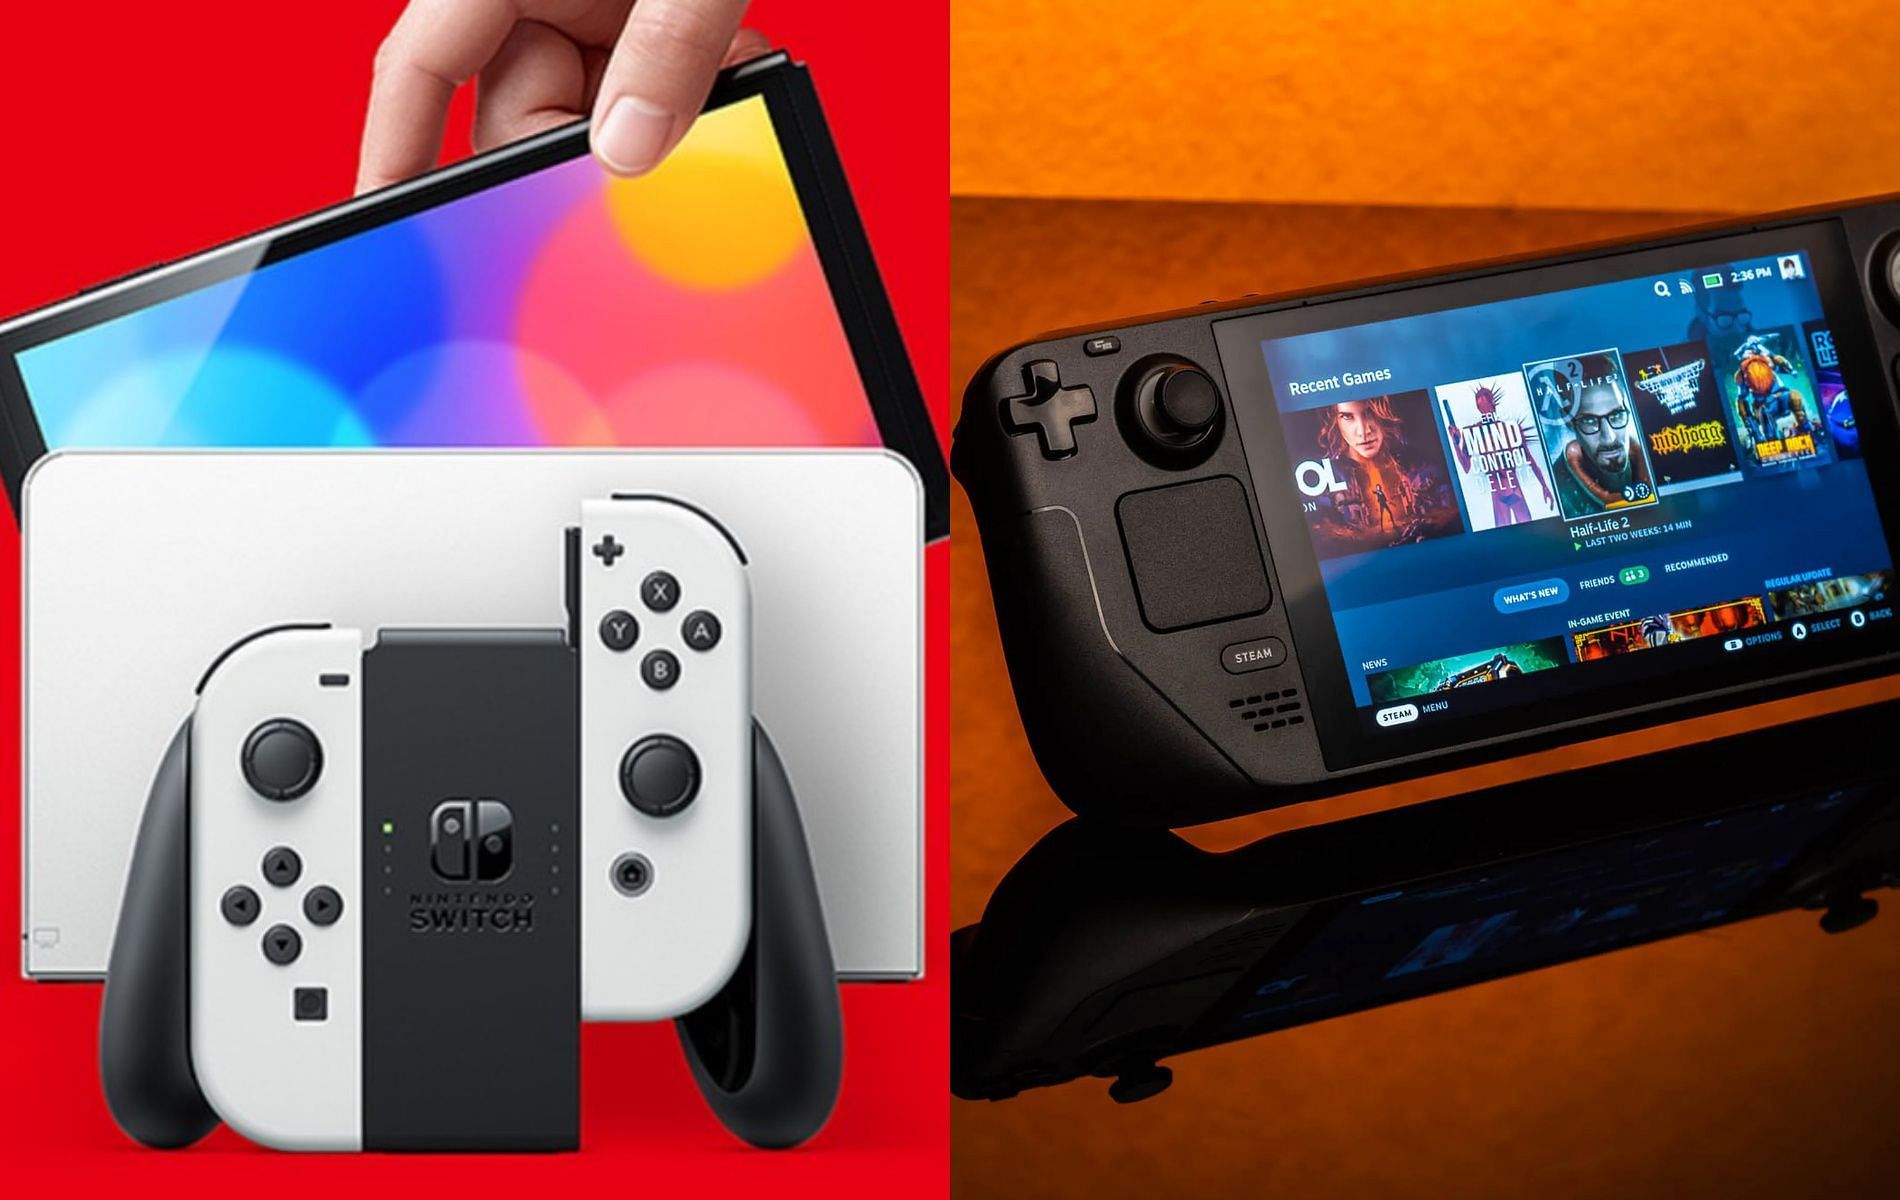 Official promotional photos for Nintendo Switch OLED model and Valve Steam Deck 